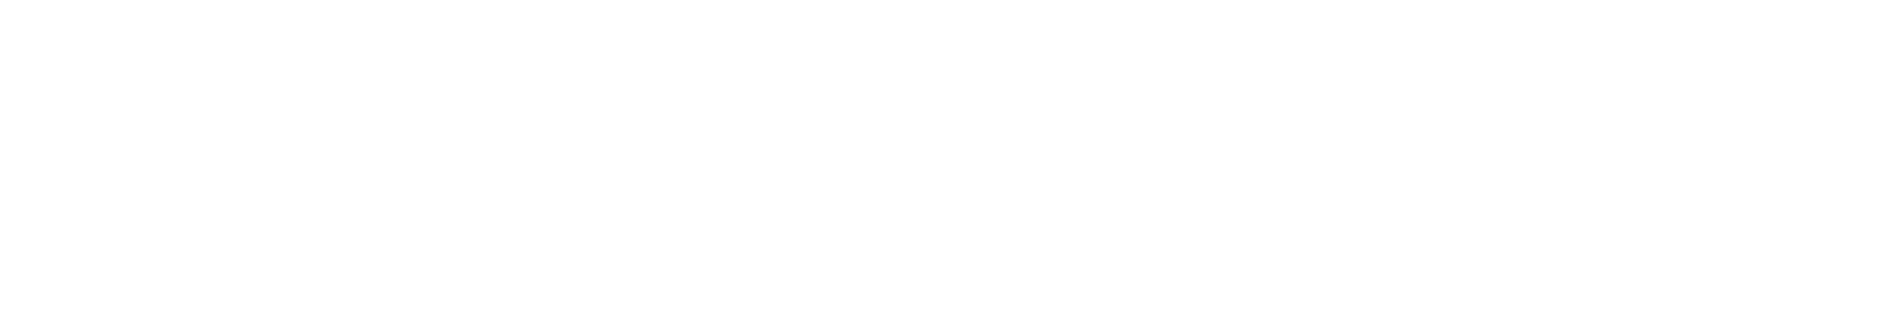 To better enjoy the performance, please switch off your mobile phone and any other light and beeping devices. Kindly be reminded that captures of sound or images, as well as eating and drinking, are not allowed. Thank you!

Programme length: approximately 